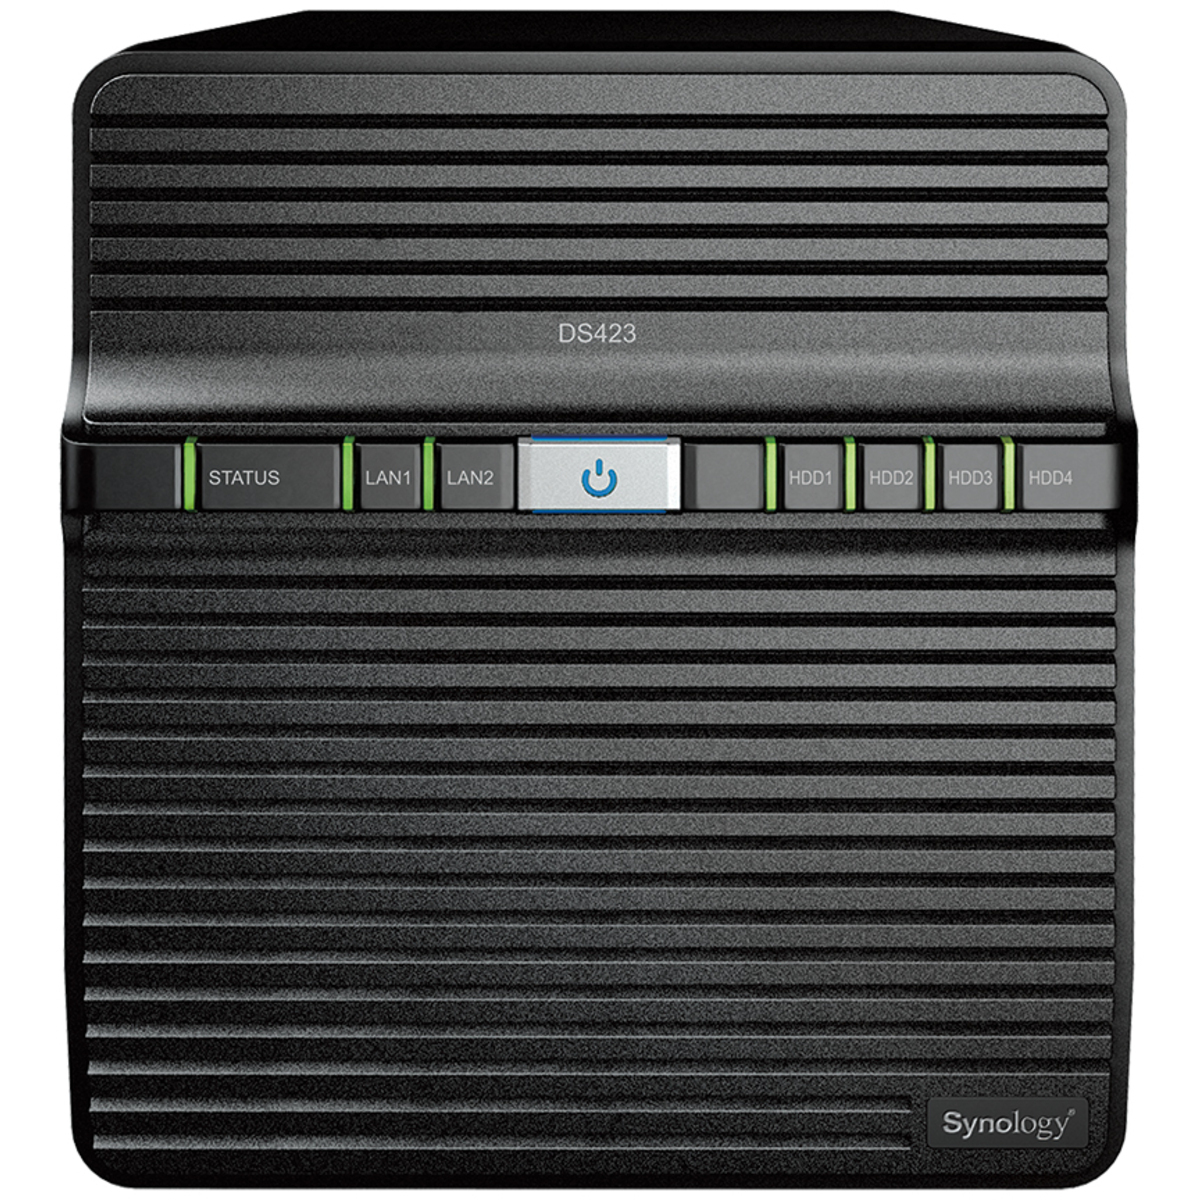 Synology DiskStation DS423 30tb 4-Bay Desktop Personal / Basic Home / Small Office NAS - Network Attached Storage Device 3x10tb Seagate IronWolf ST10000VN000 3.5 7200rpm SATA 6Gb/s HDD NAS Class Drives Installed - Burn-In Tested DiskStation DS423